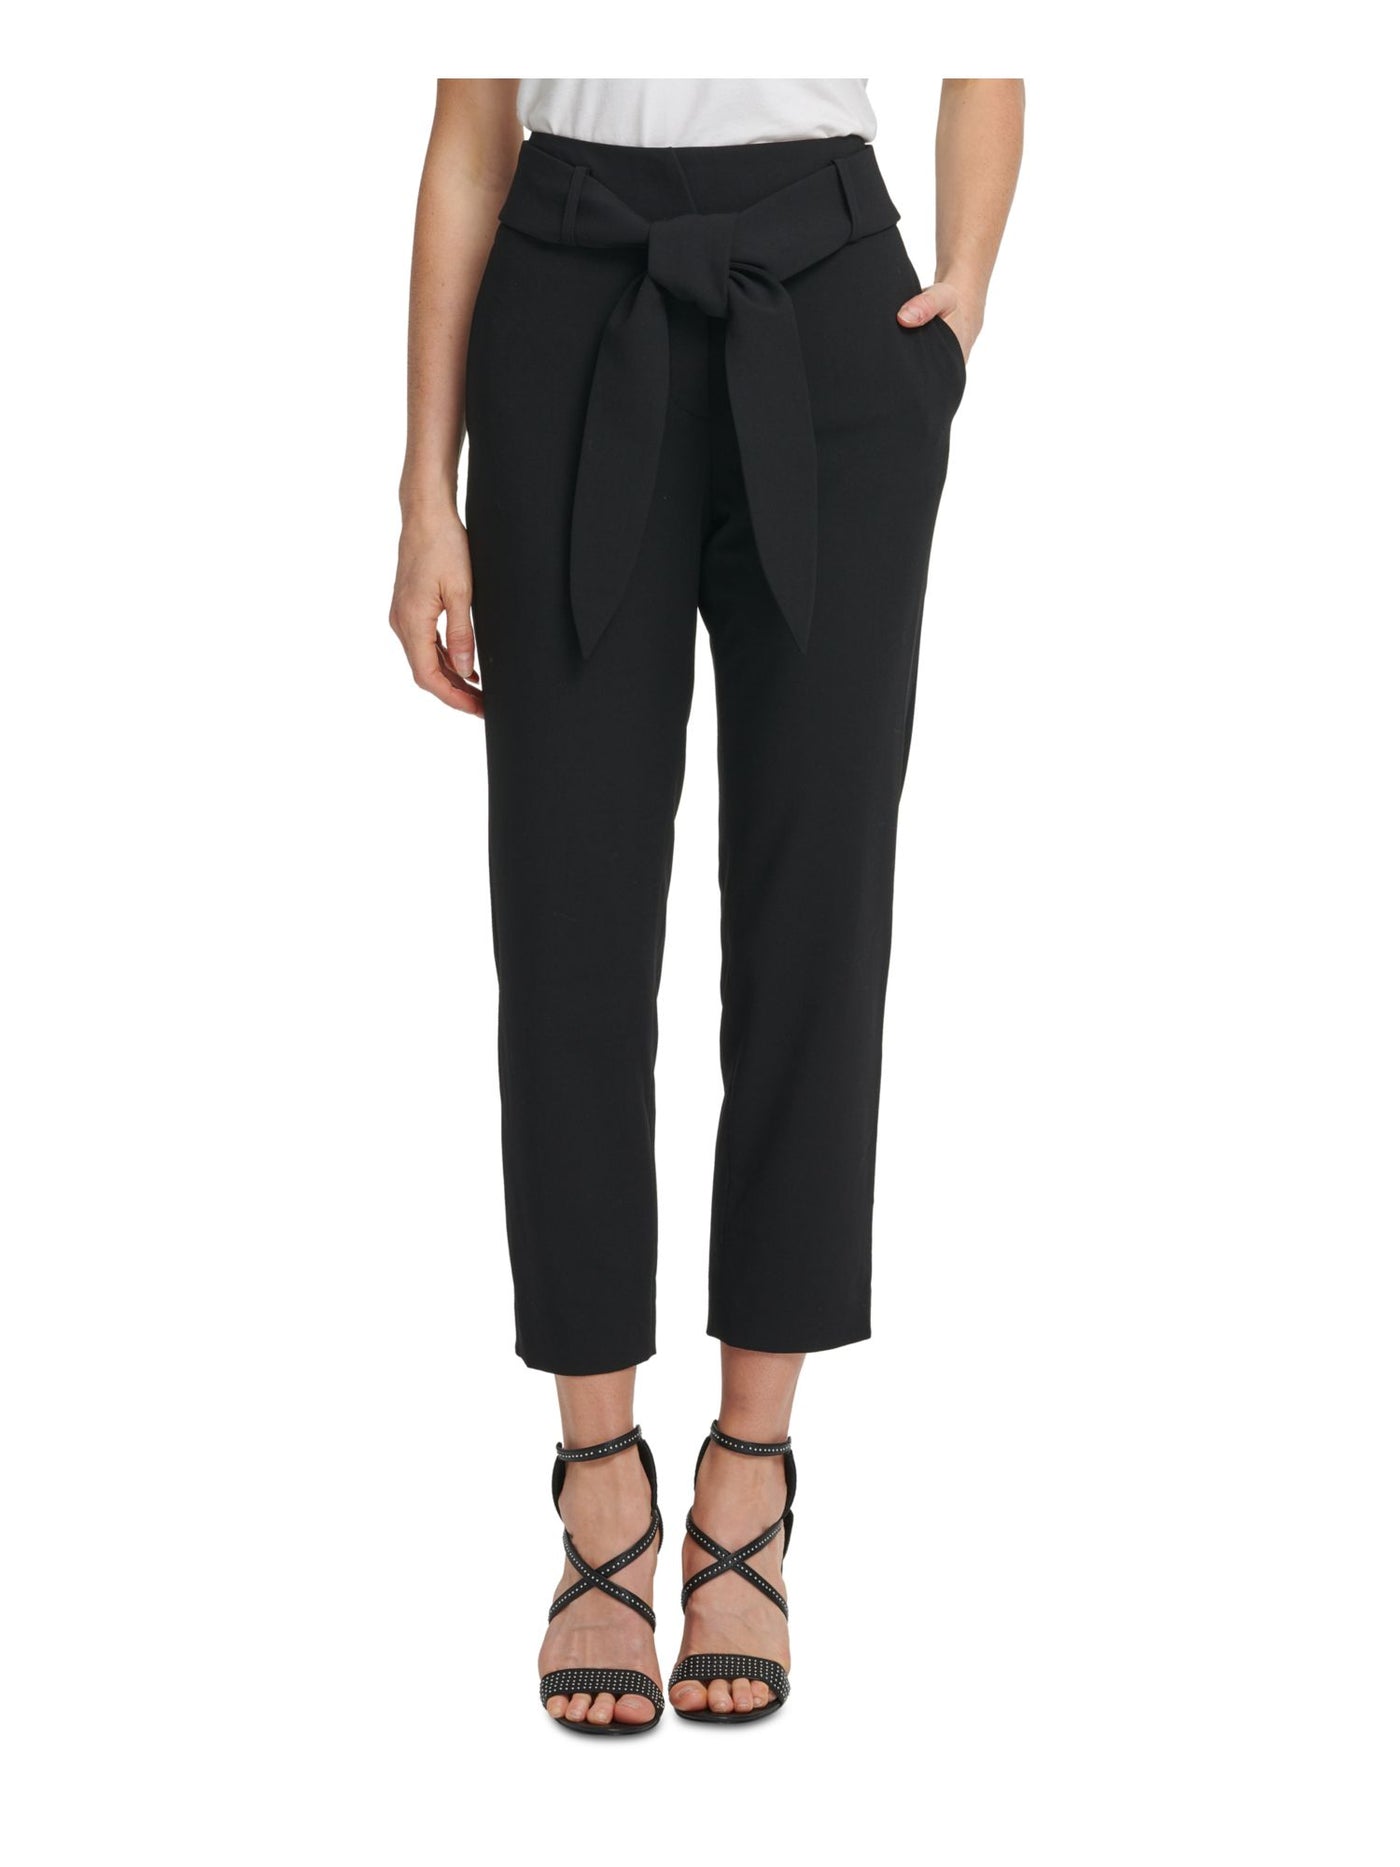 DKNY Womens Black Pocketed Zippered Tie Ankle Hook And Bar Closure Wear To Work High Waist Pants Petites 14P